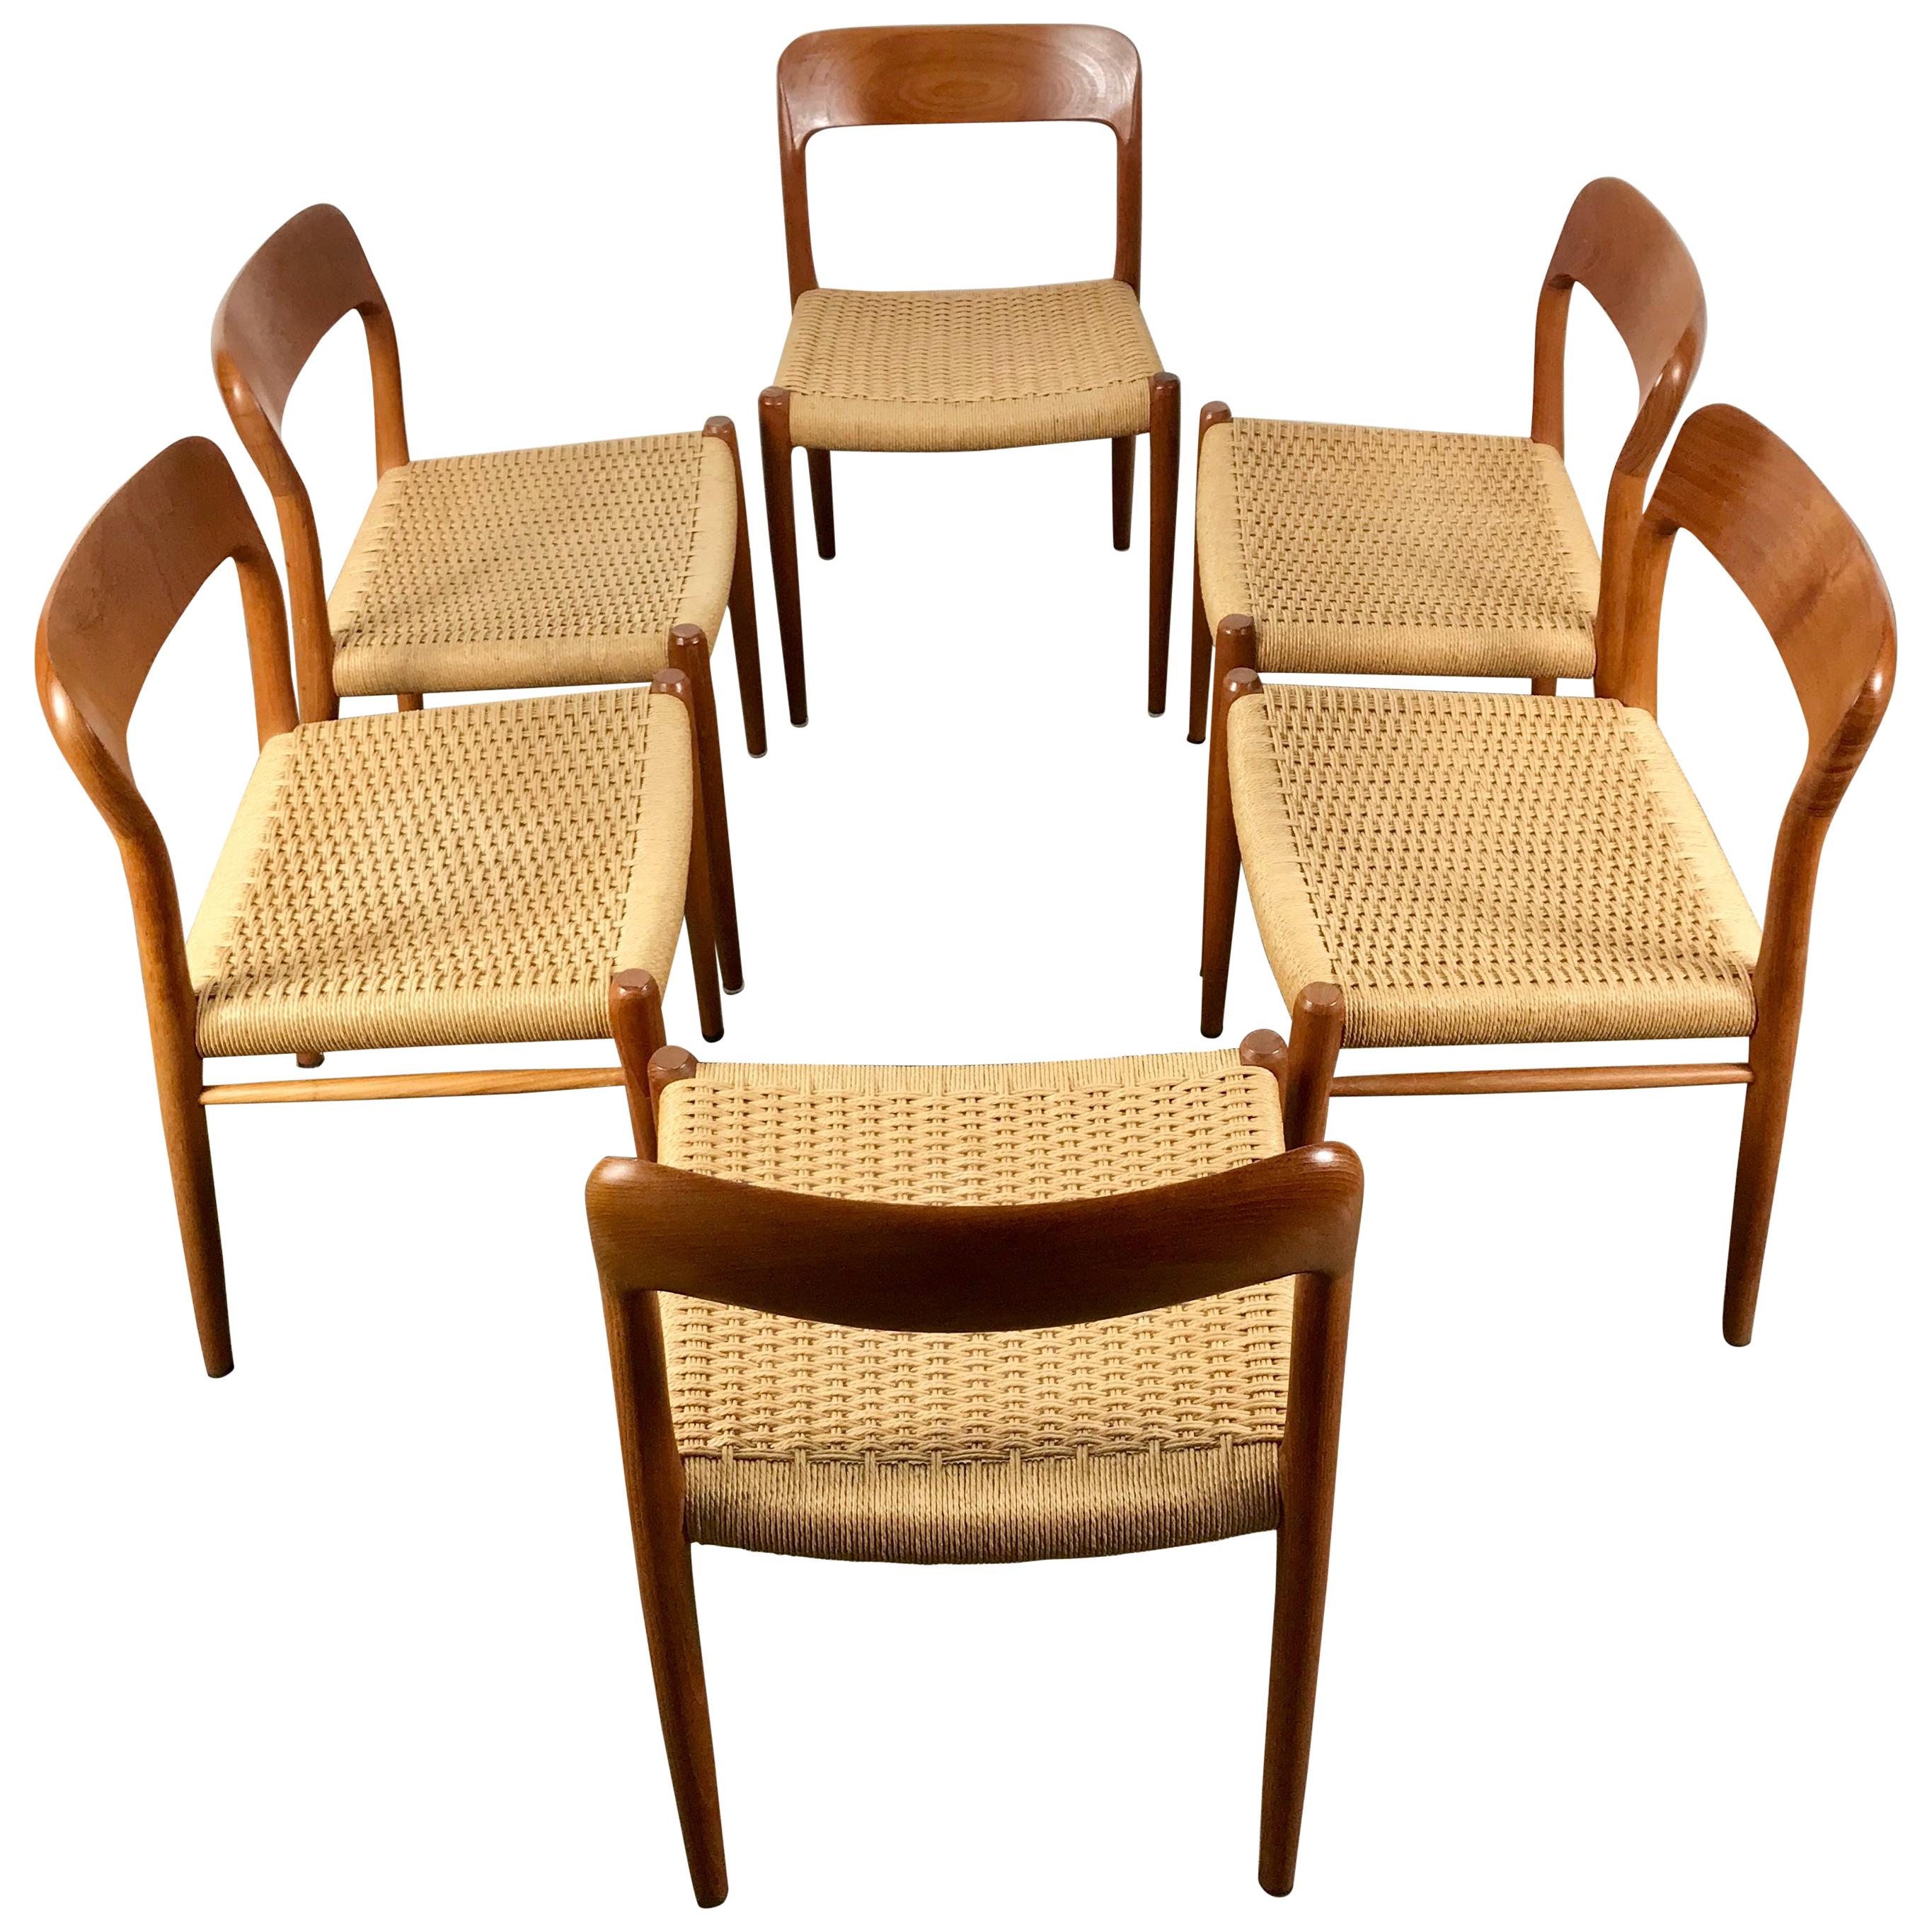 Classic Set 6 Teak and Cane Dining Chairs, Niels Moller Model 75, Denmark